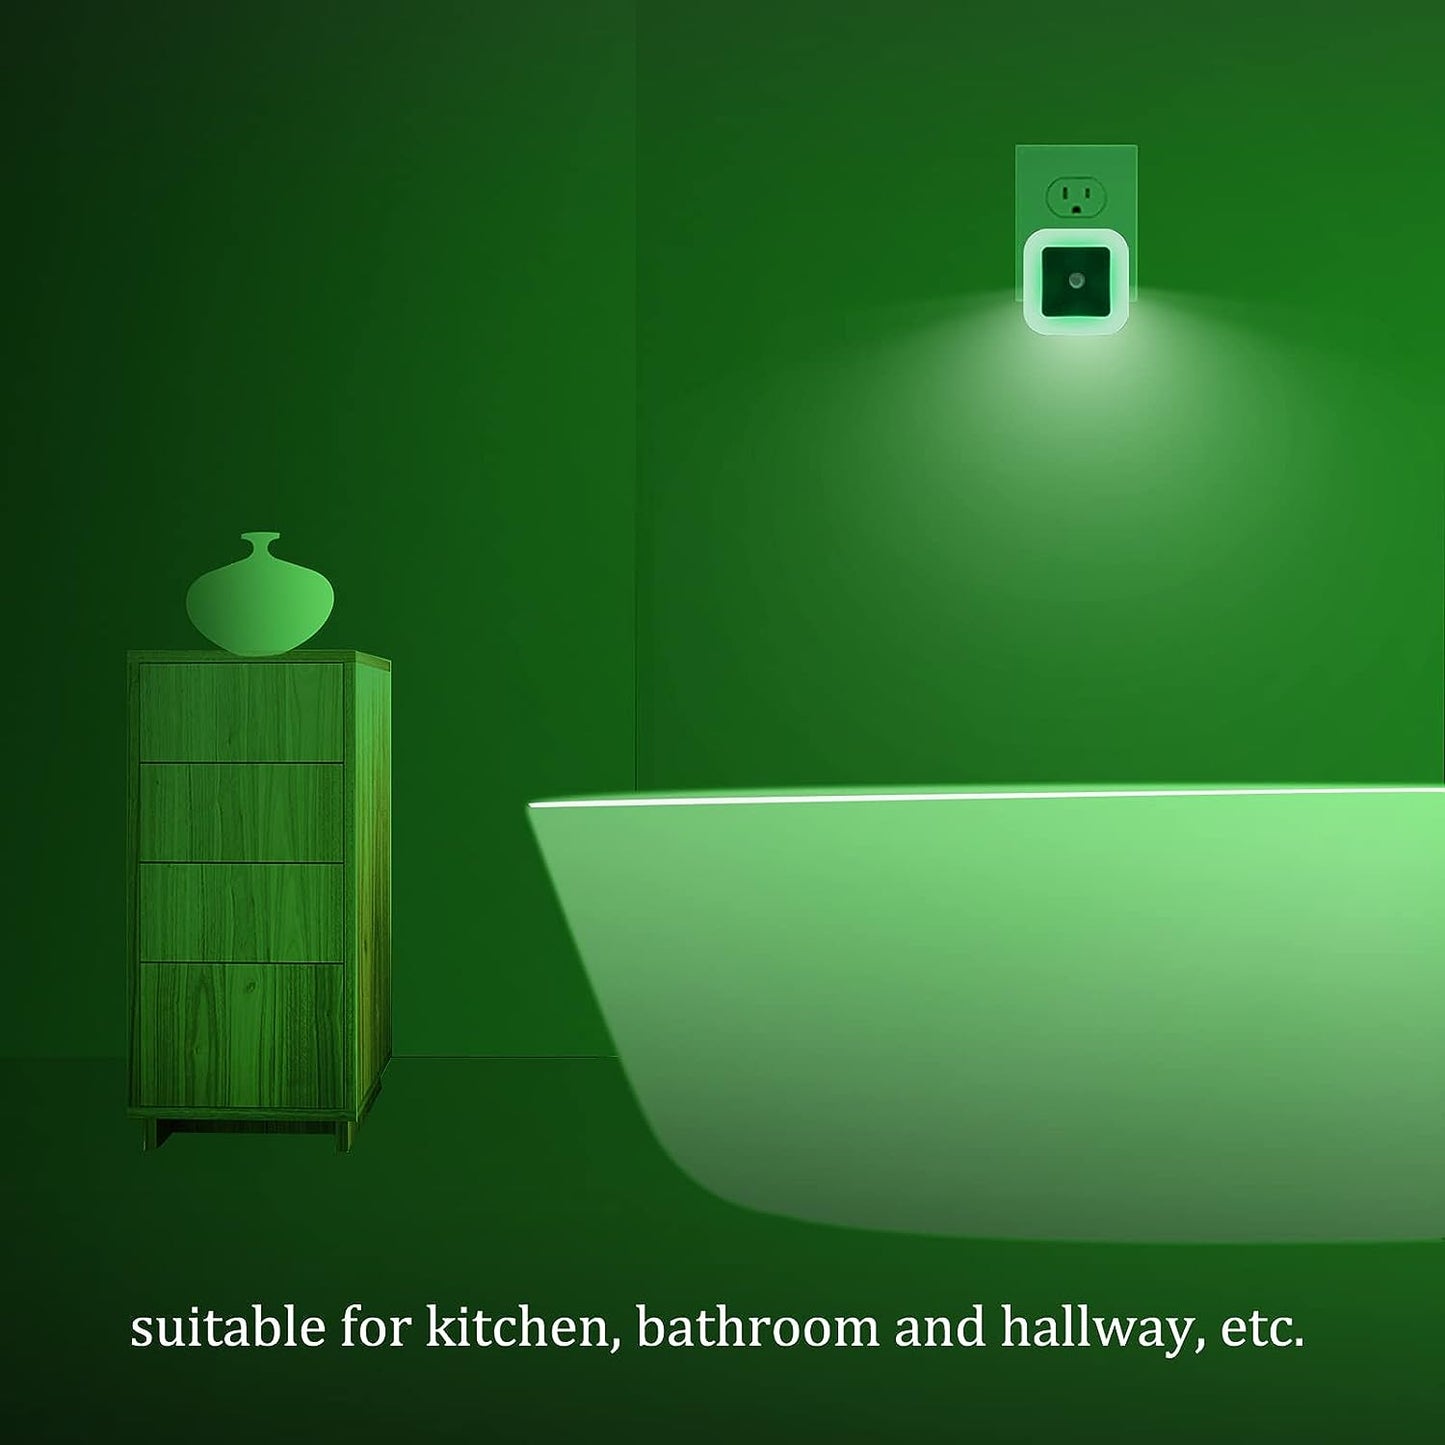 [Pack of 2] Bright Green Night Lights, Plug Into LED Wall Lights with Light Sensor, Auto ON/Off- Suitable for Bathroom, Hallway and Kitchen